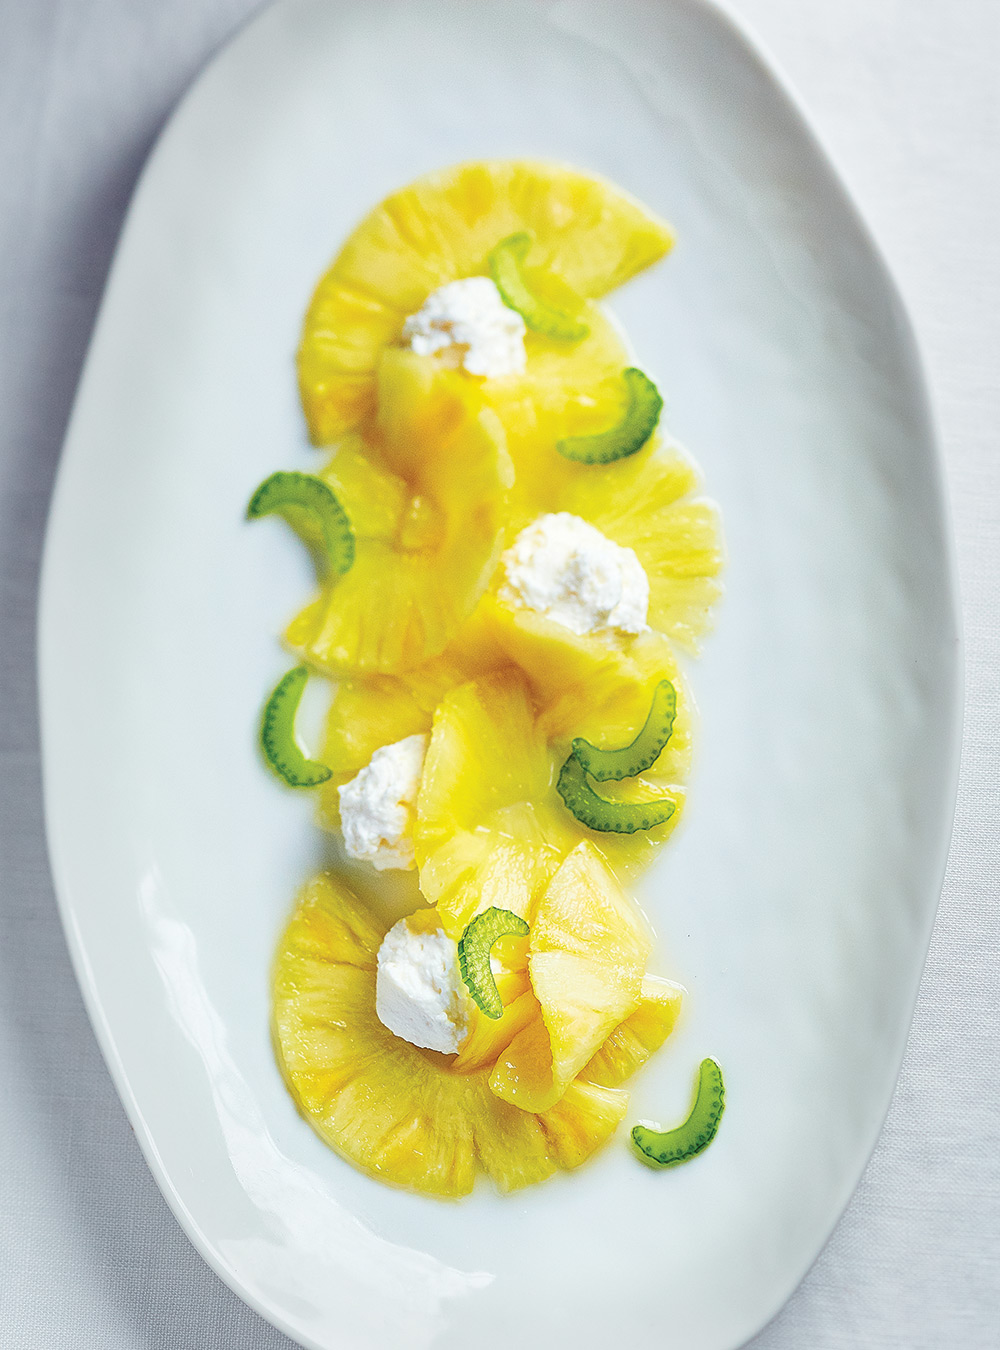 Pineapple Carpaccio with Ricotta Cream and Candied Celery